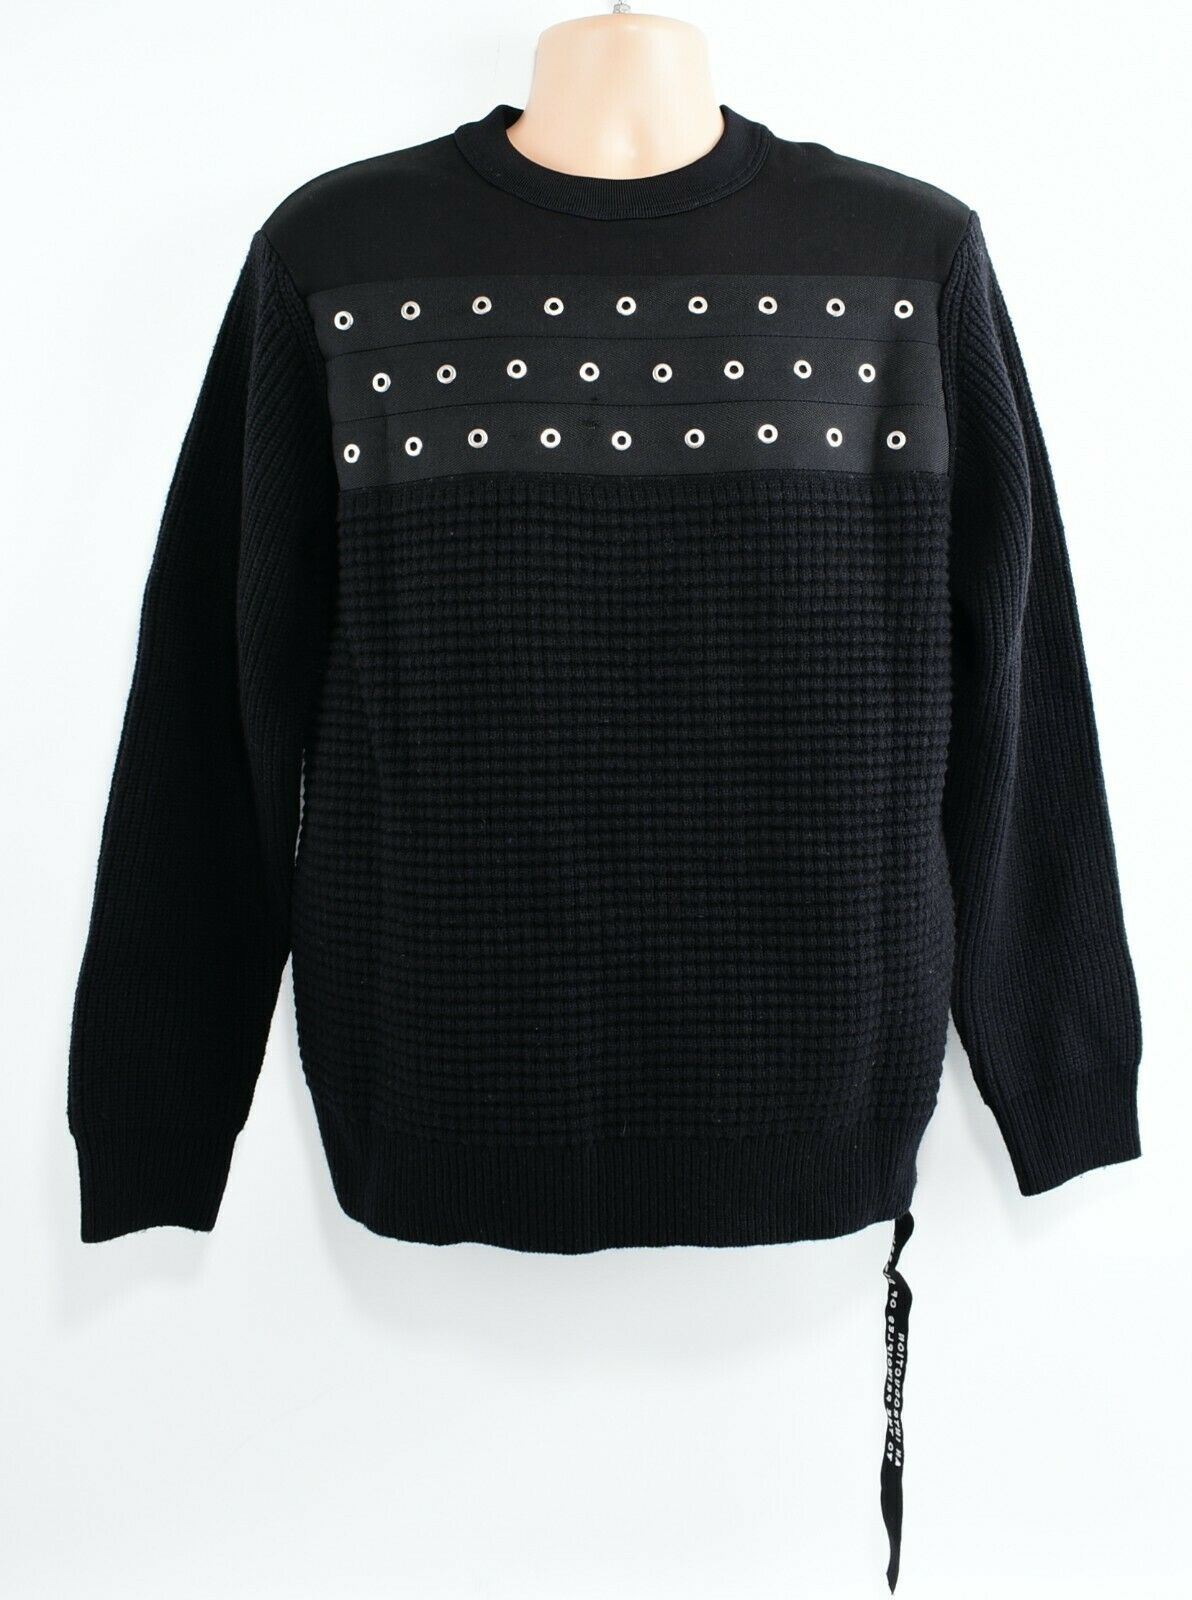 DIESEL Men's K-RUSHIS Textured Jumper with Eyelets, Black size M *stitched hole*